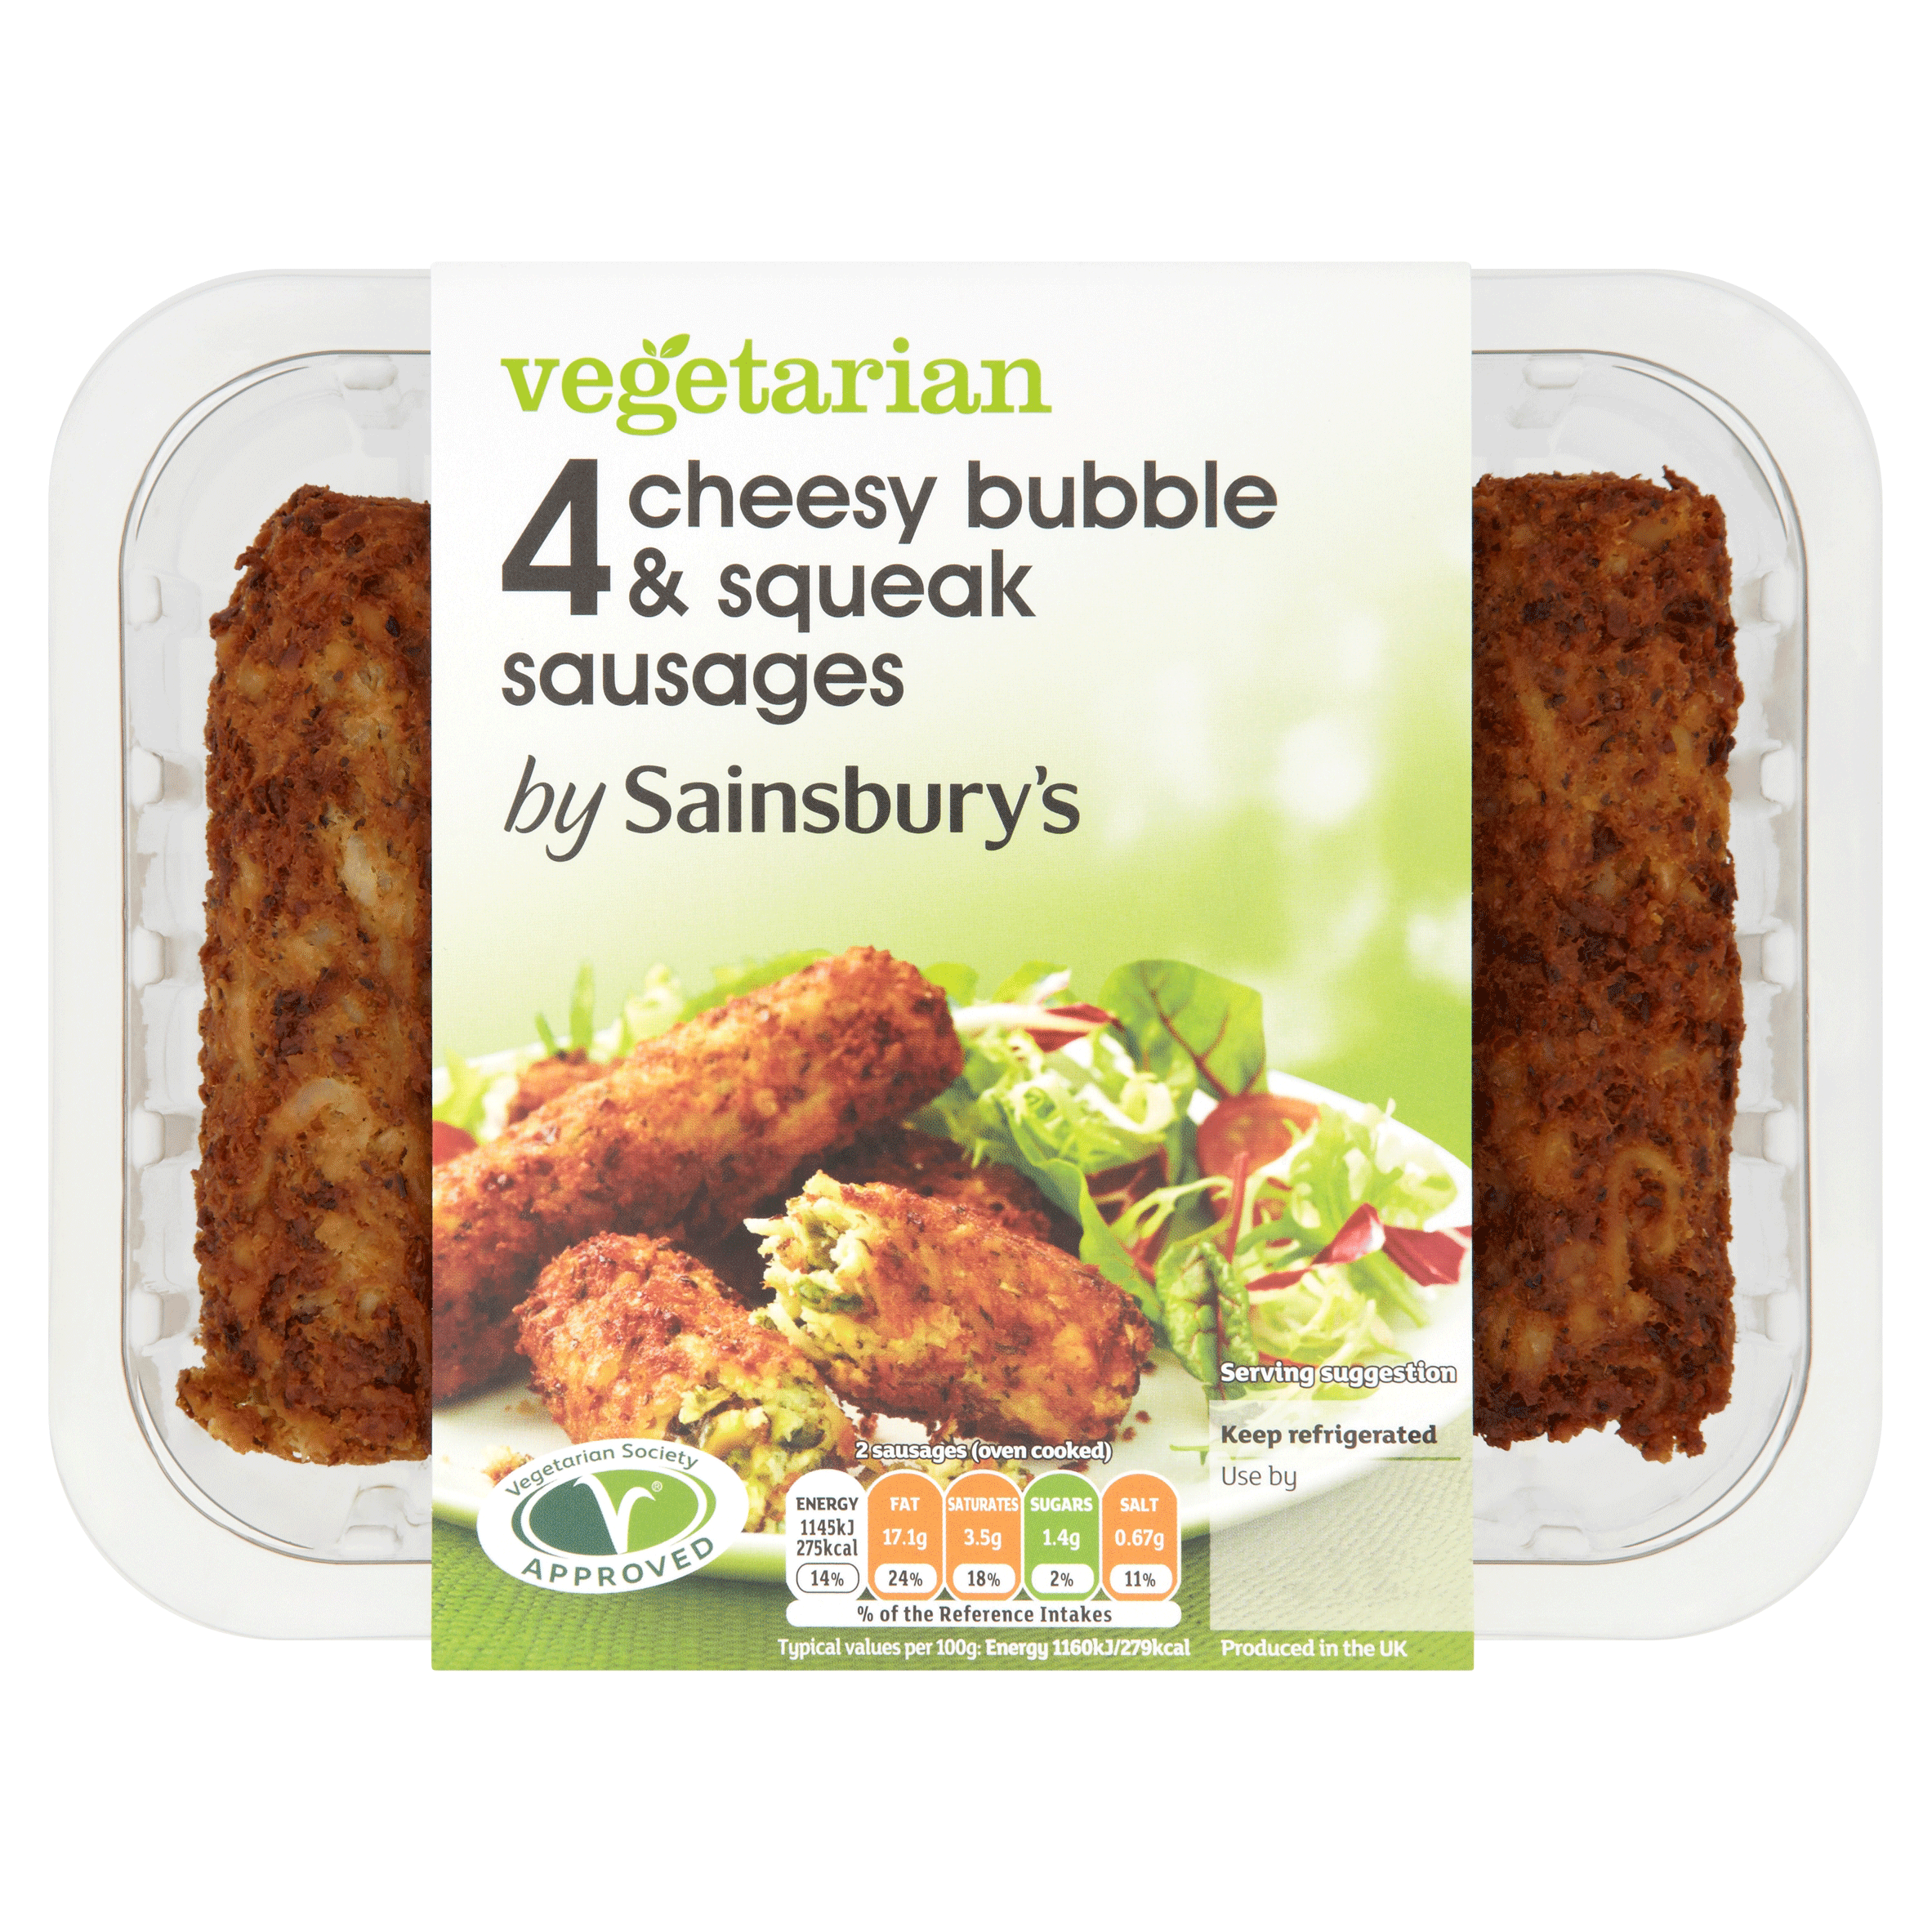 Sainsbury's Cheesy Bubble and Squeak Meat Free Sausages